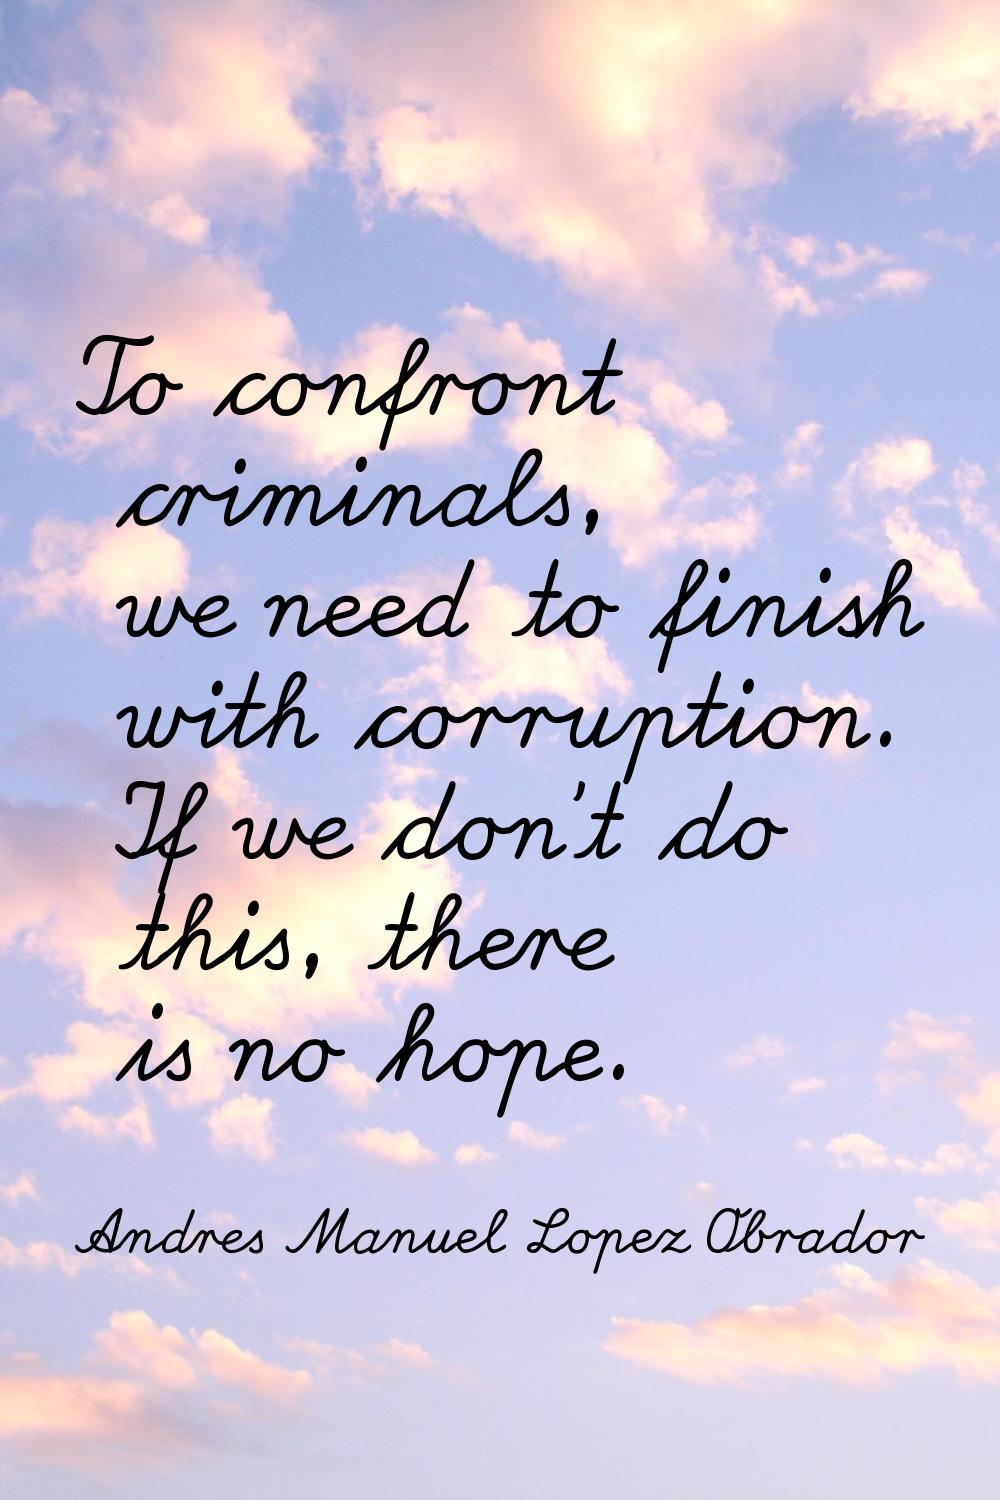 To confront criminals, we need to finish with corruption. If we don't do this, there is no hope.